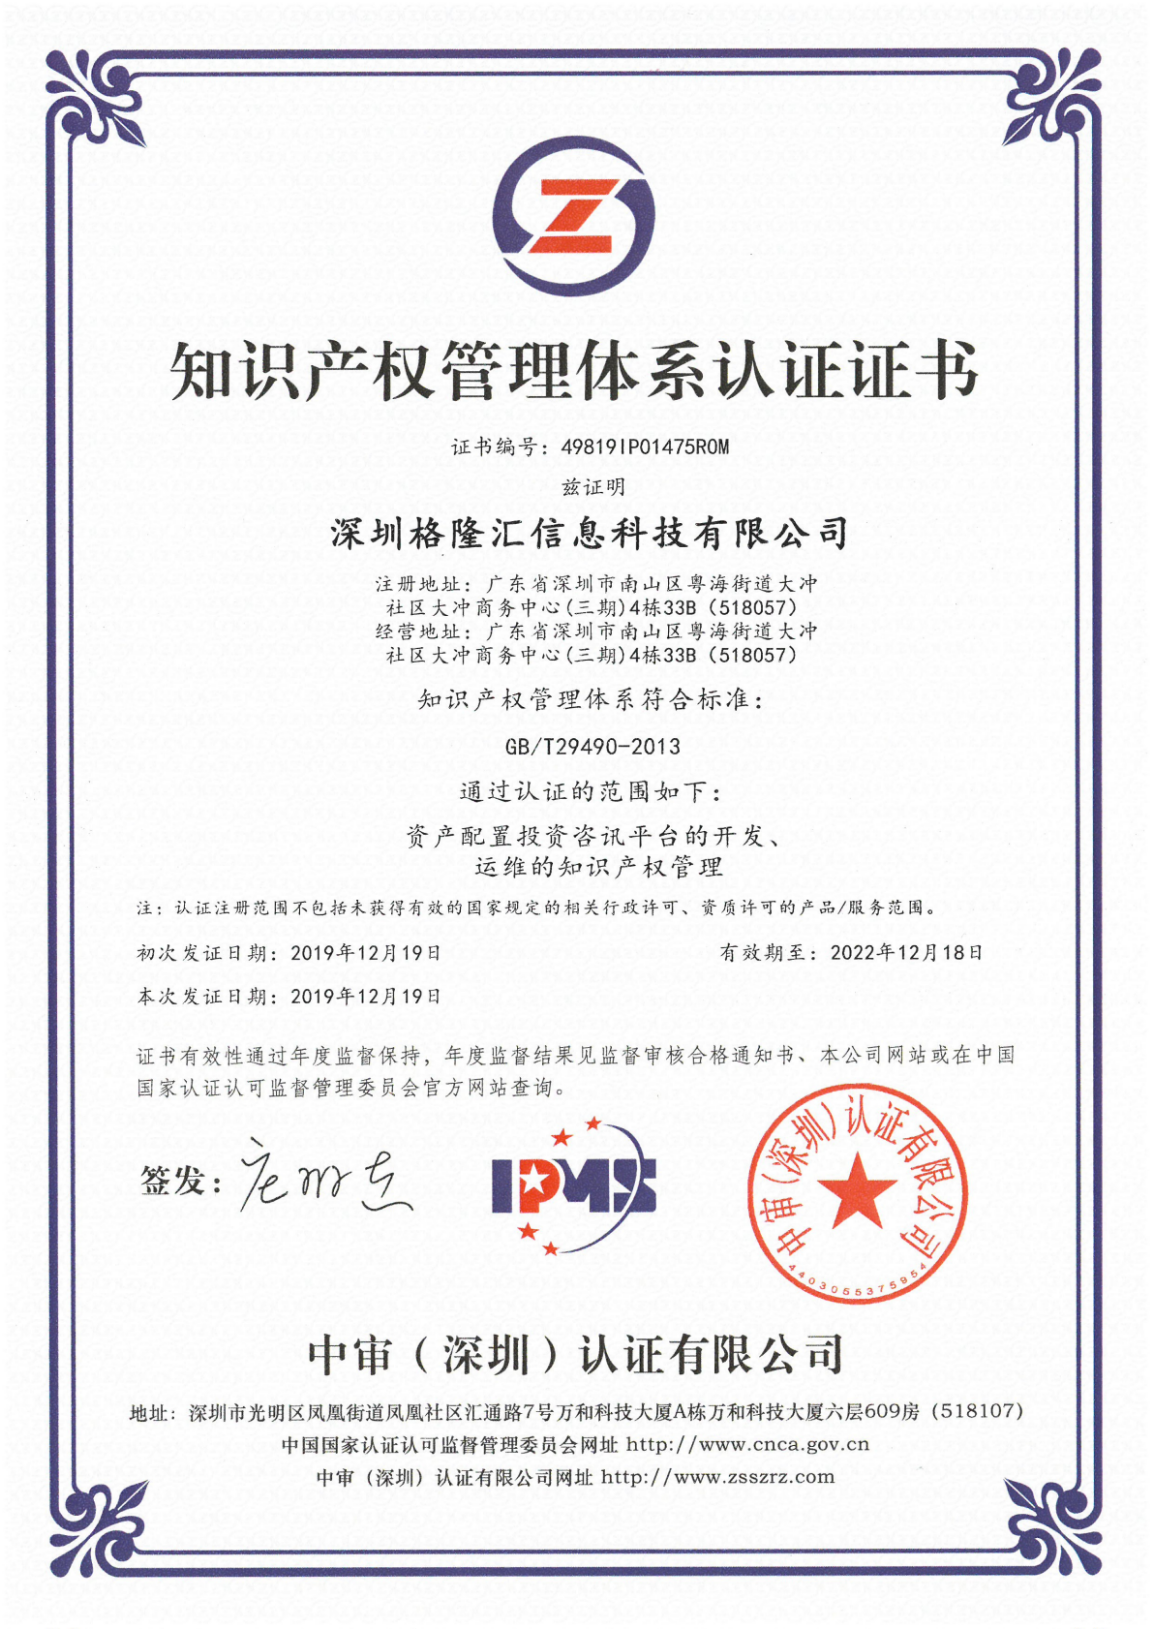 Gelonghui passed the certification of double soft enterprise and national intellectual property management system certification